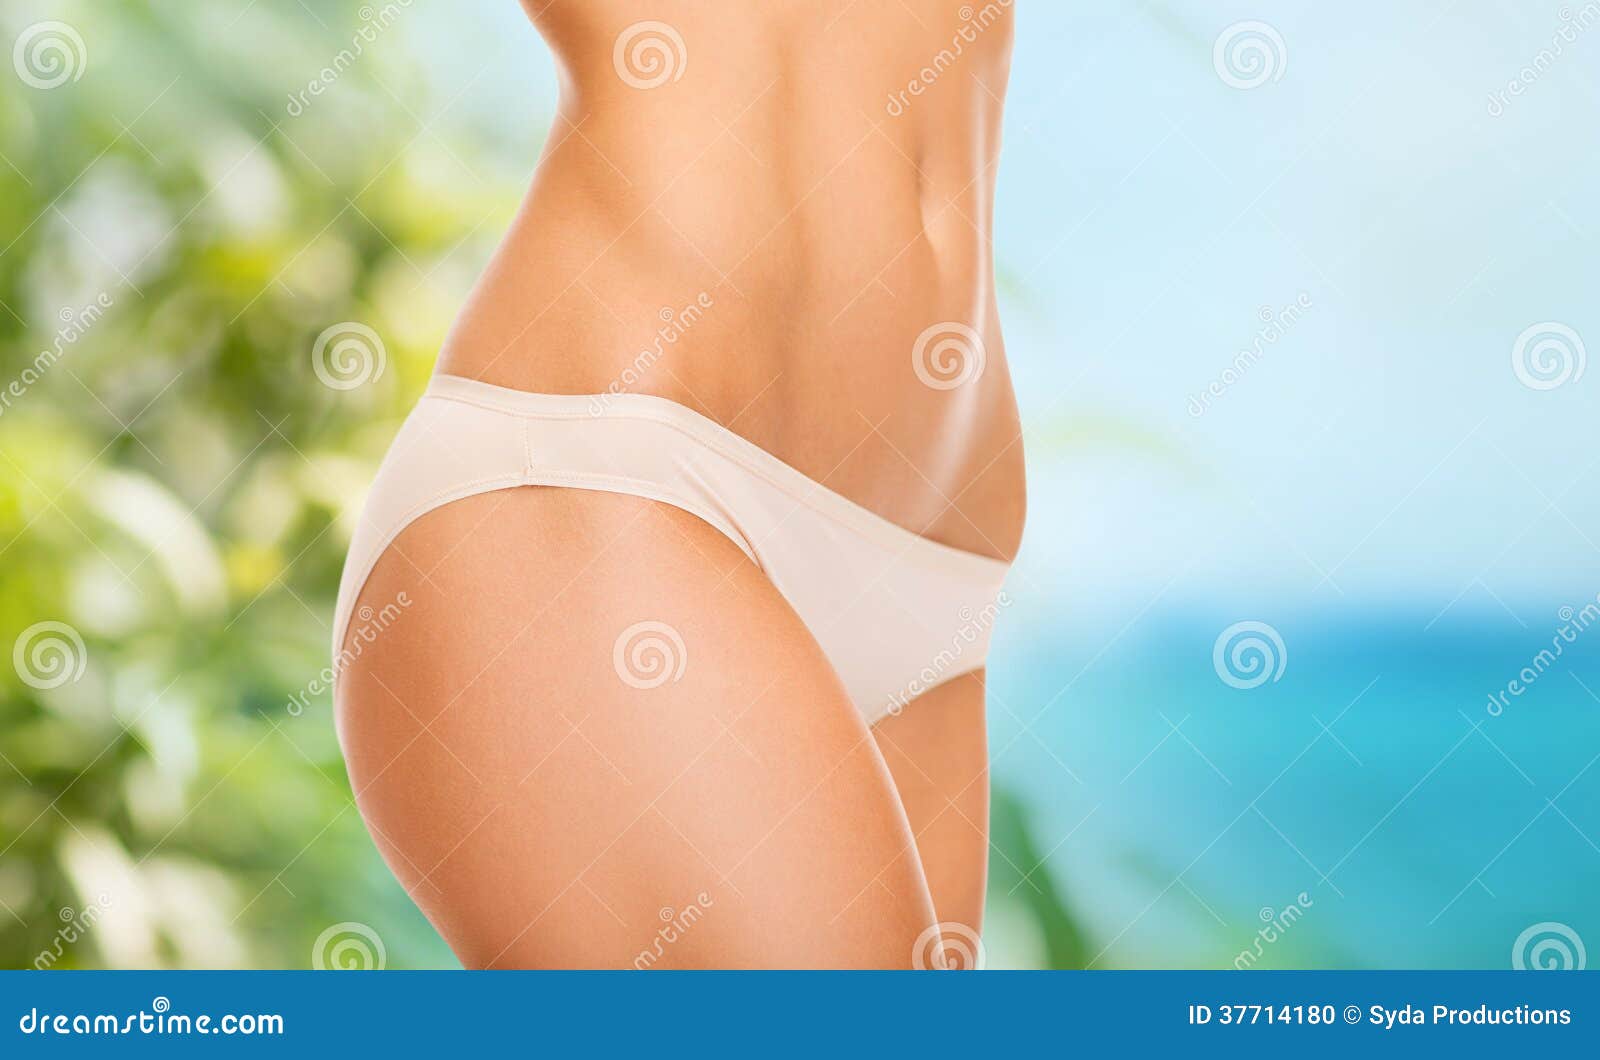 Green Panties Stock Photos and Pictures - 13,177 Images